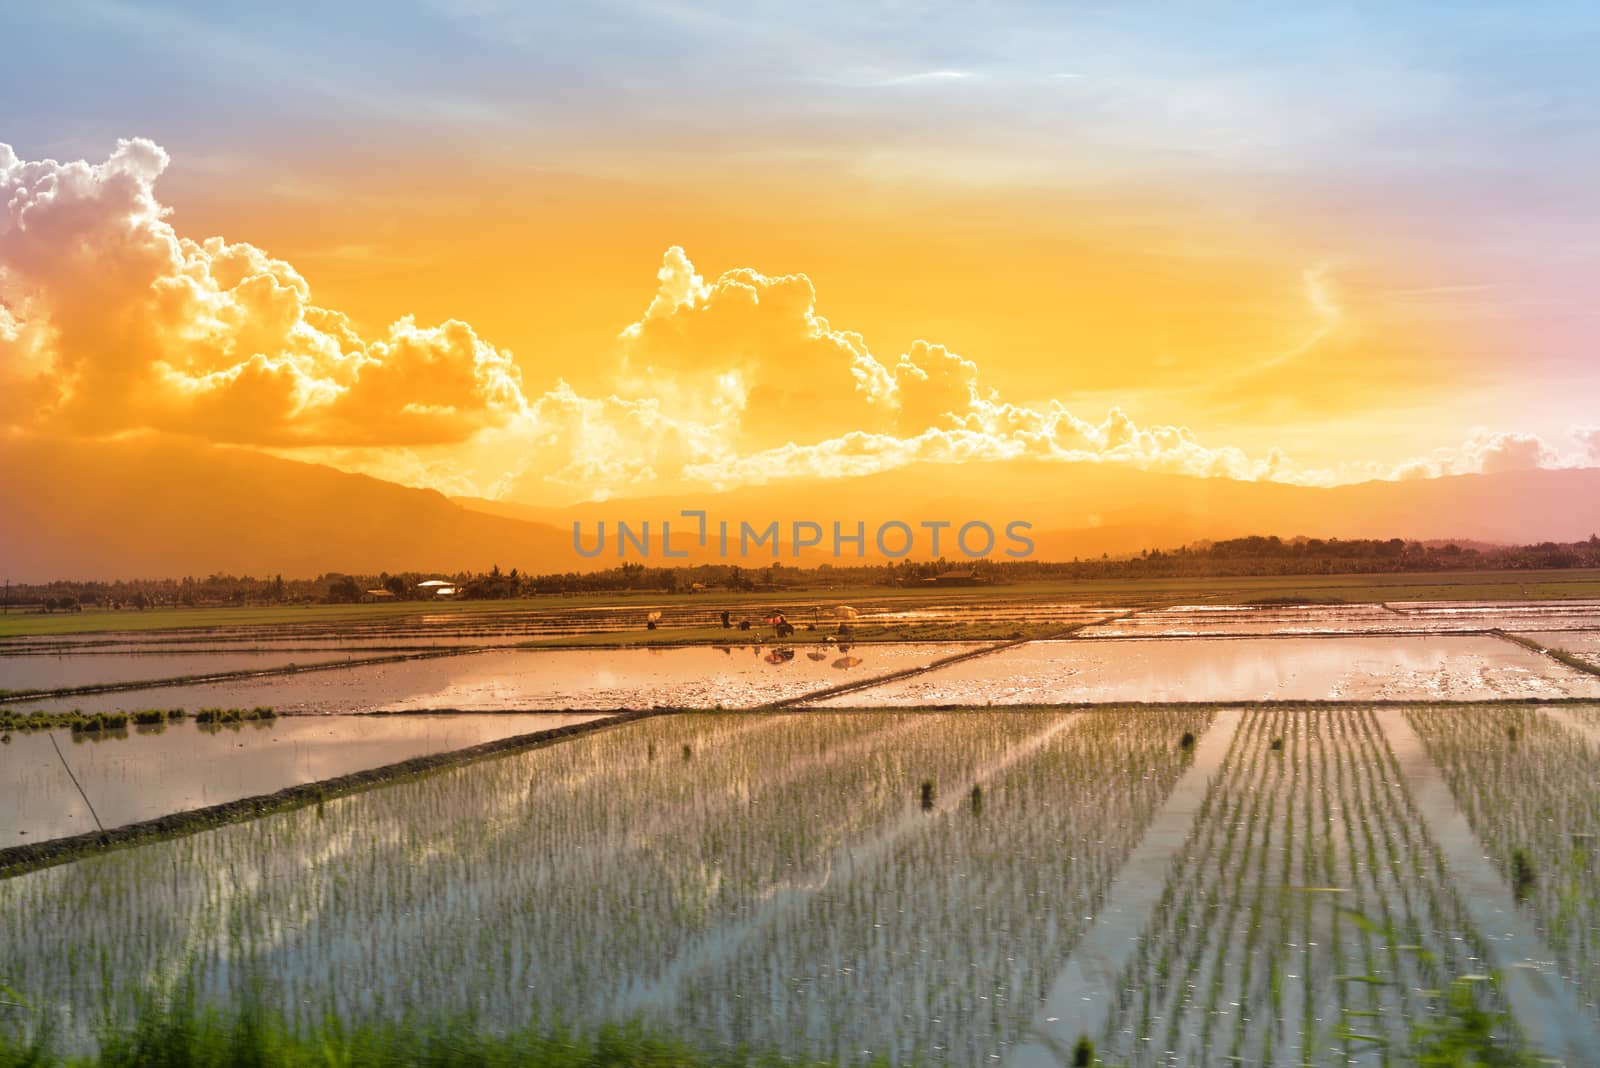 workers in a paddy field at sunset by morrbyte